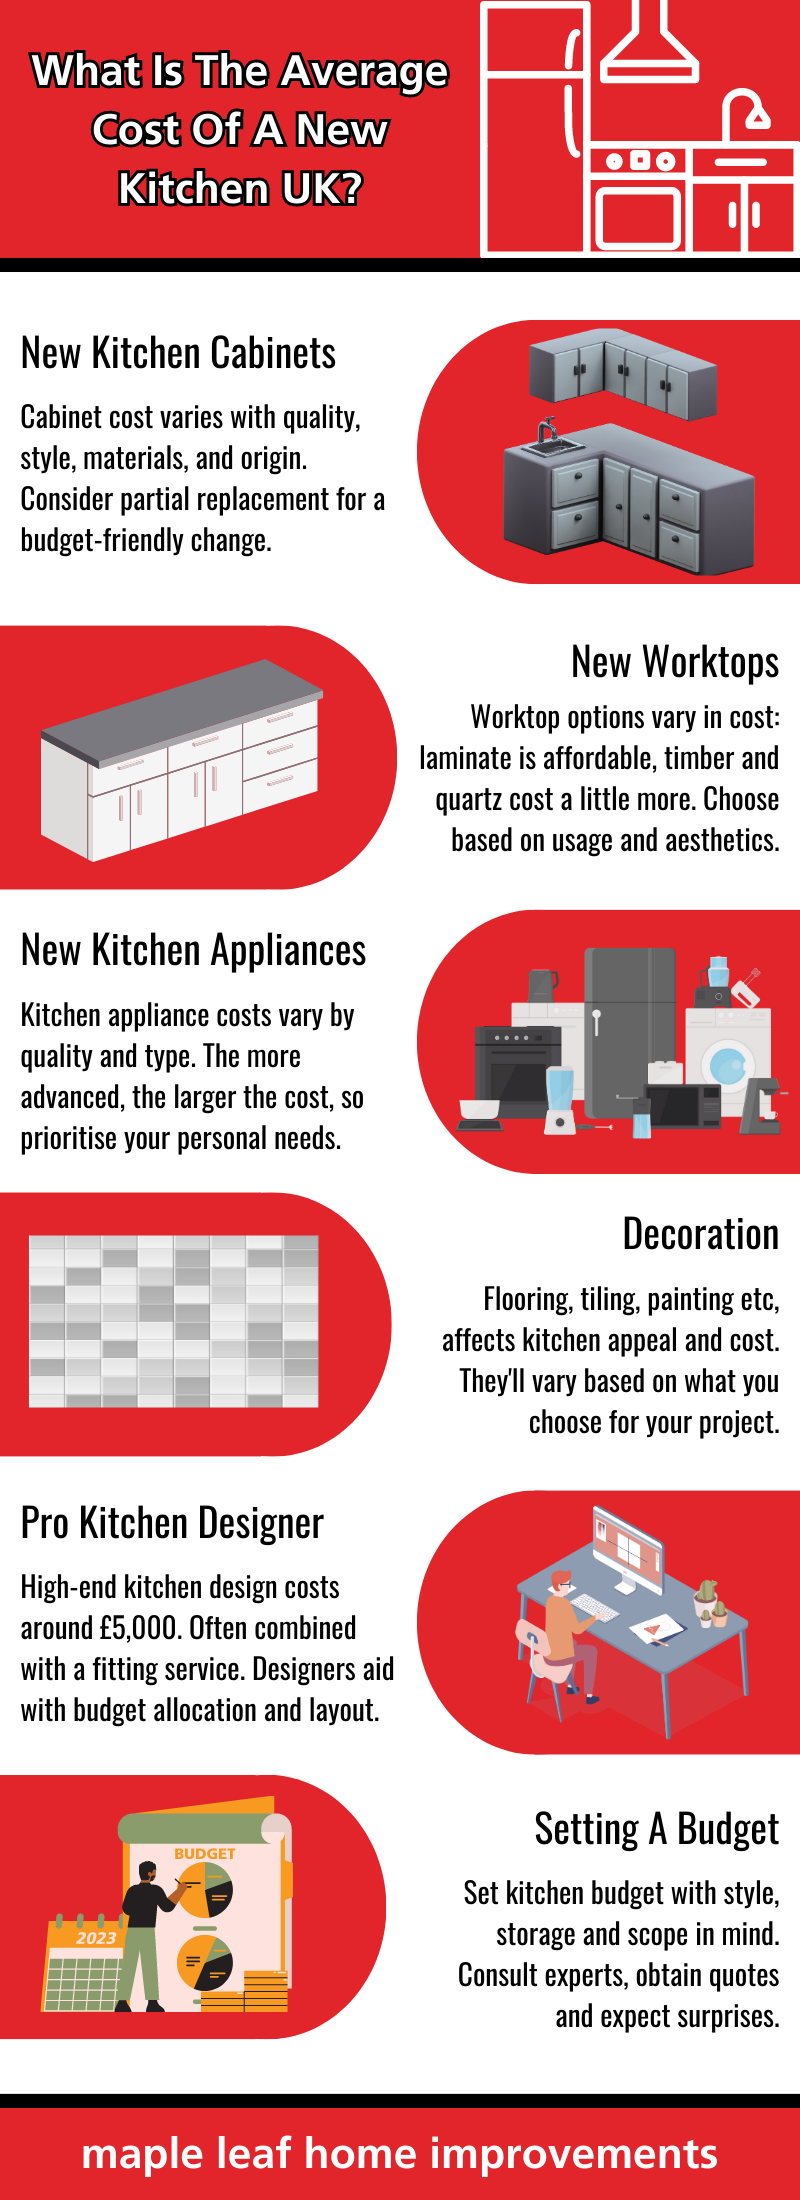 What Is The Average Cost Of A New Kitchen UK?